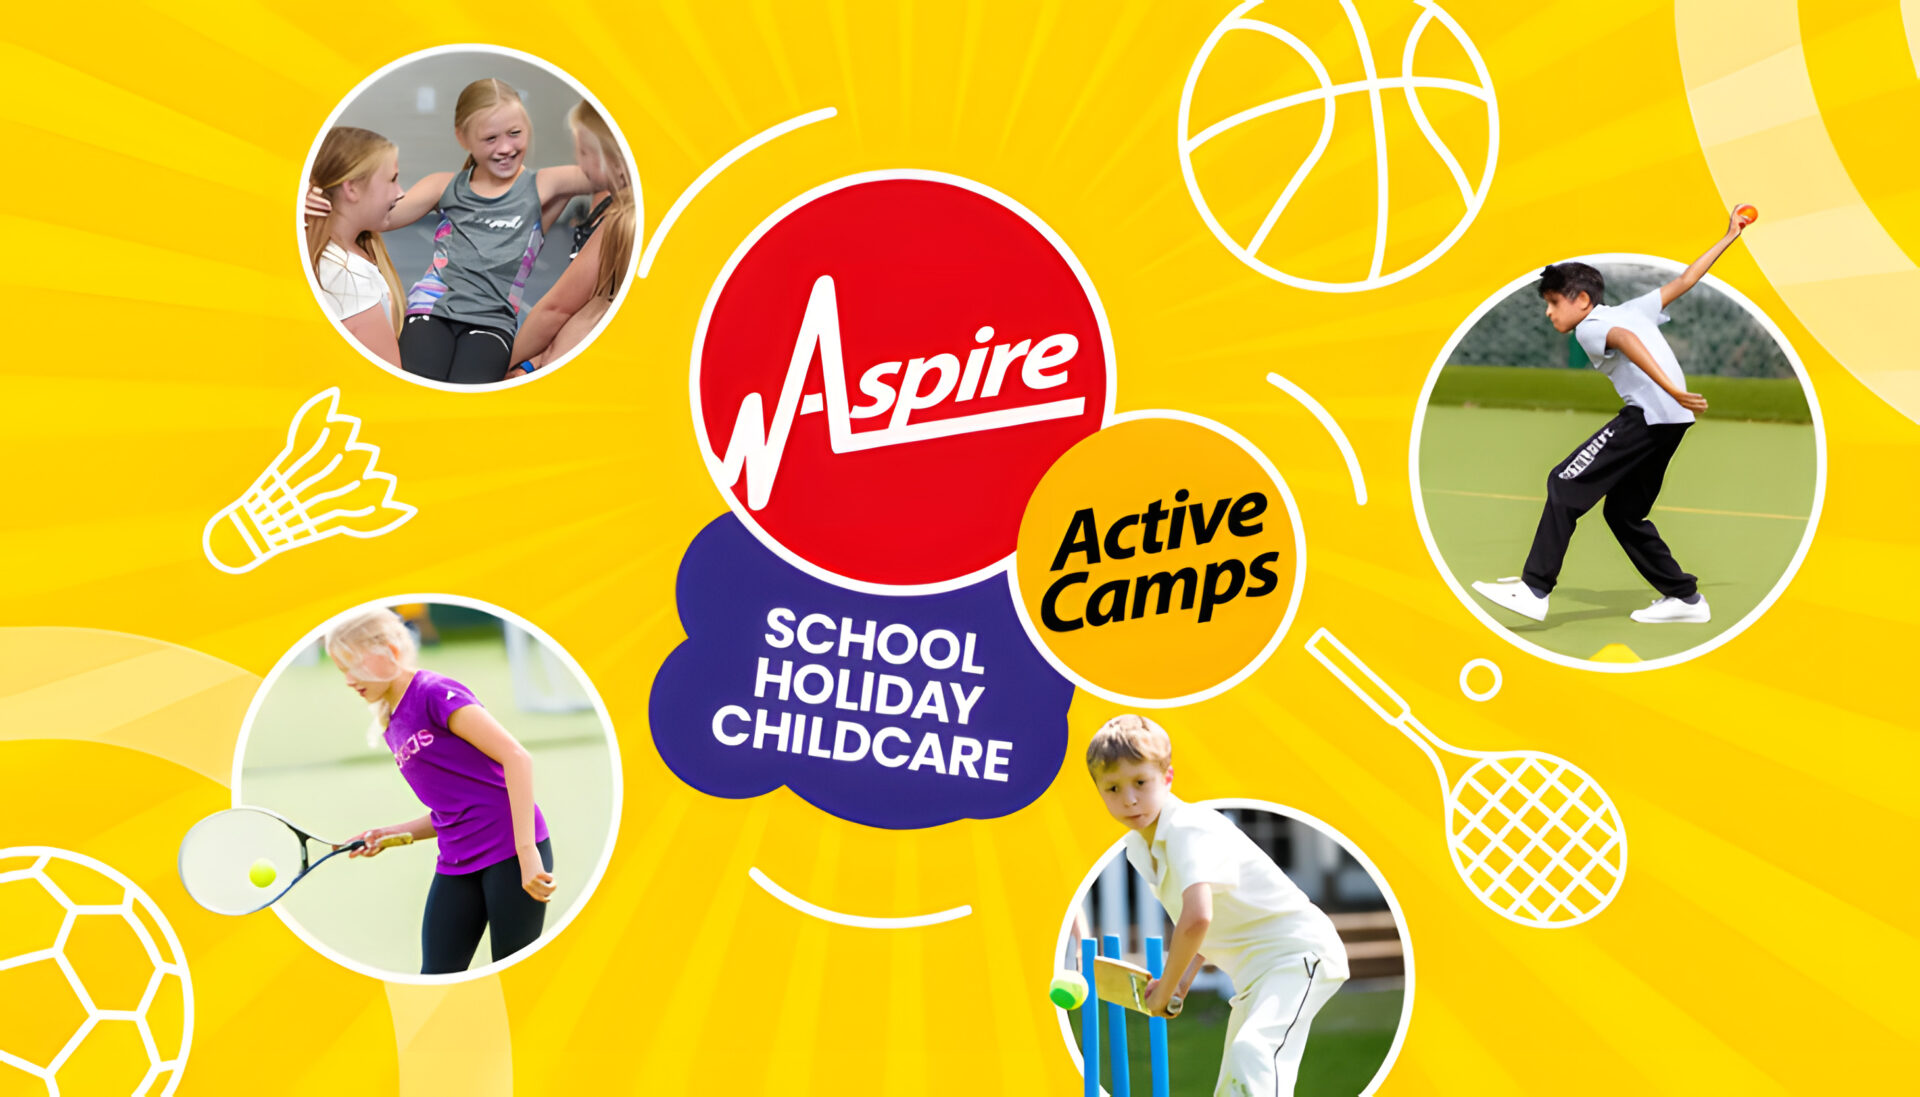 Half term holiday camp in Alvechurch with Aspire Active Camps